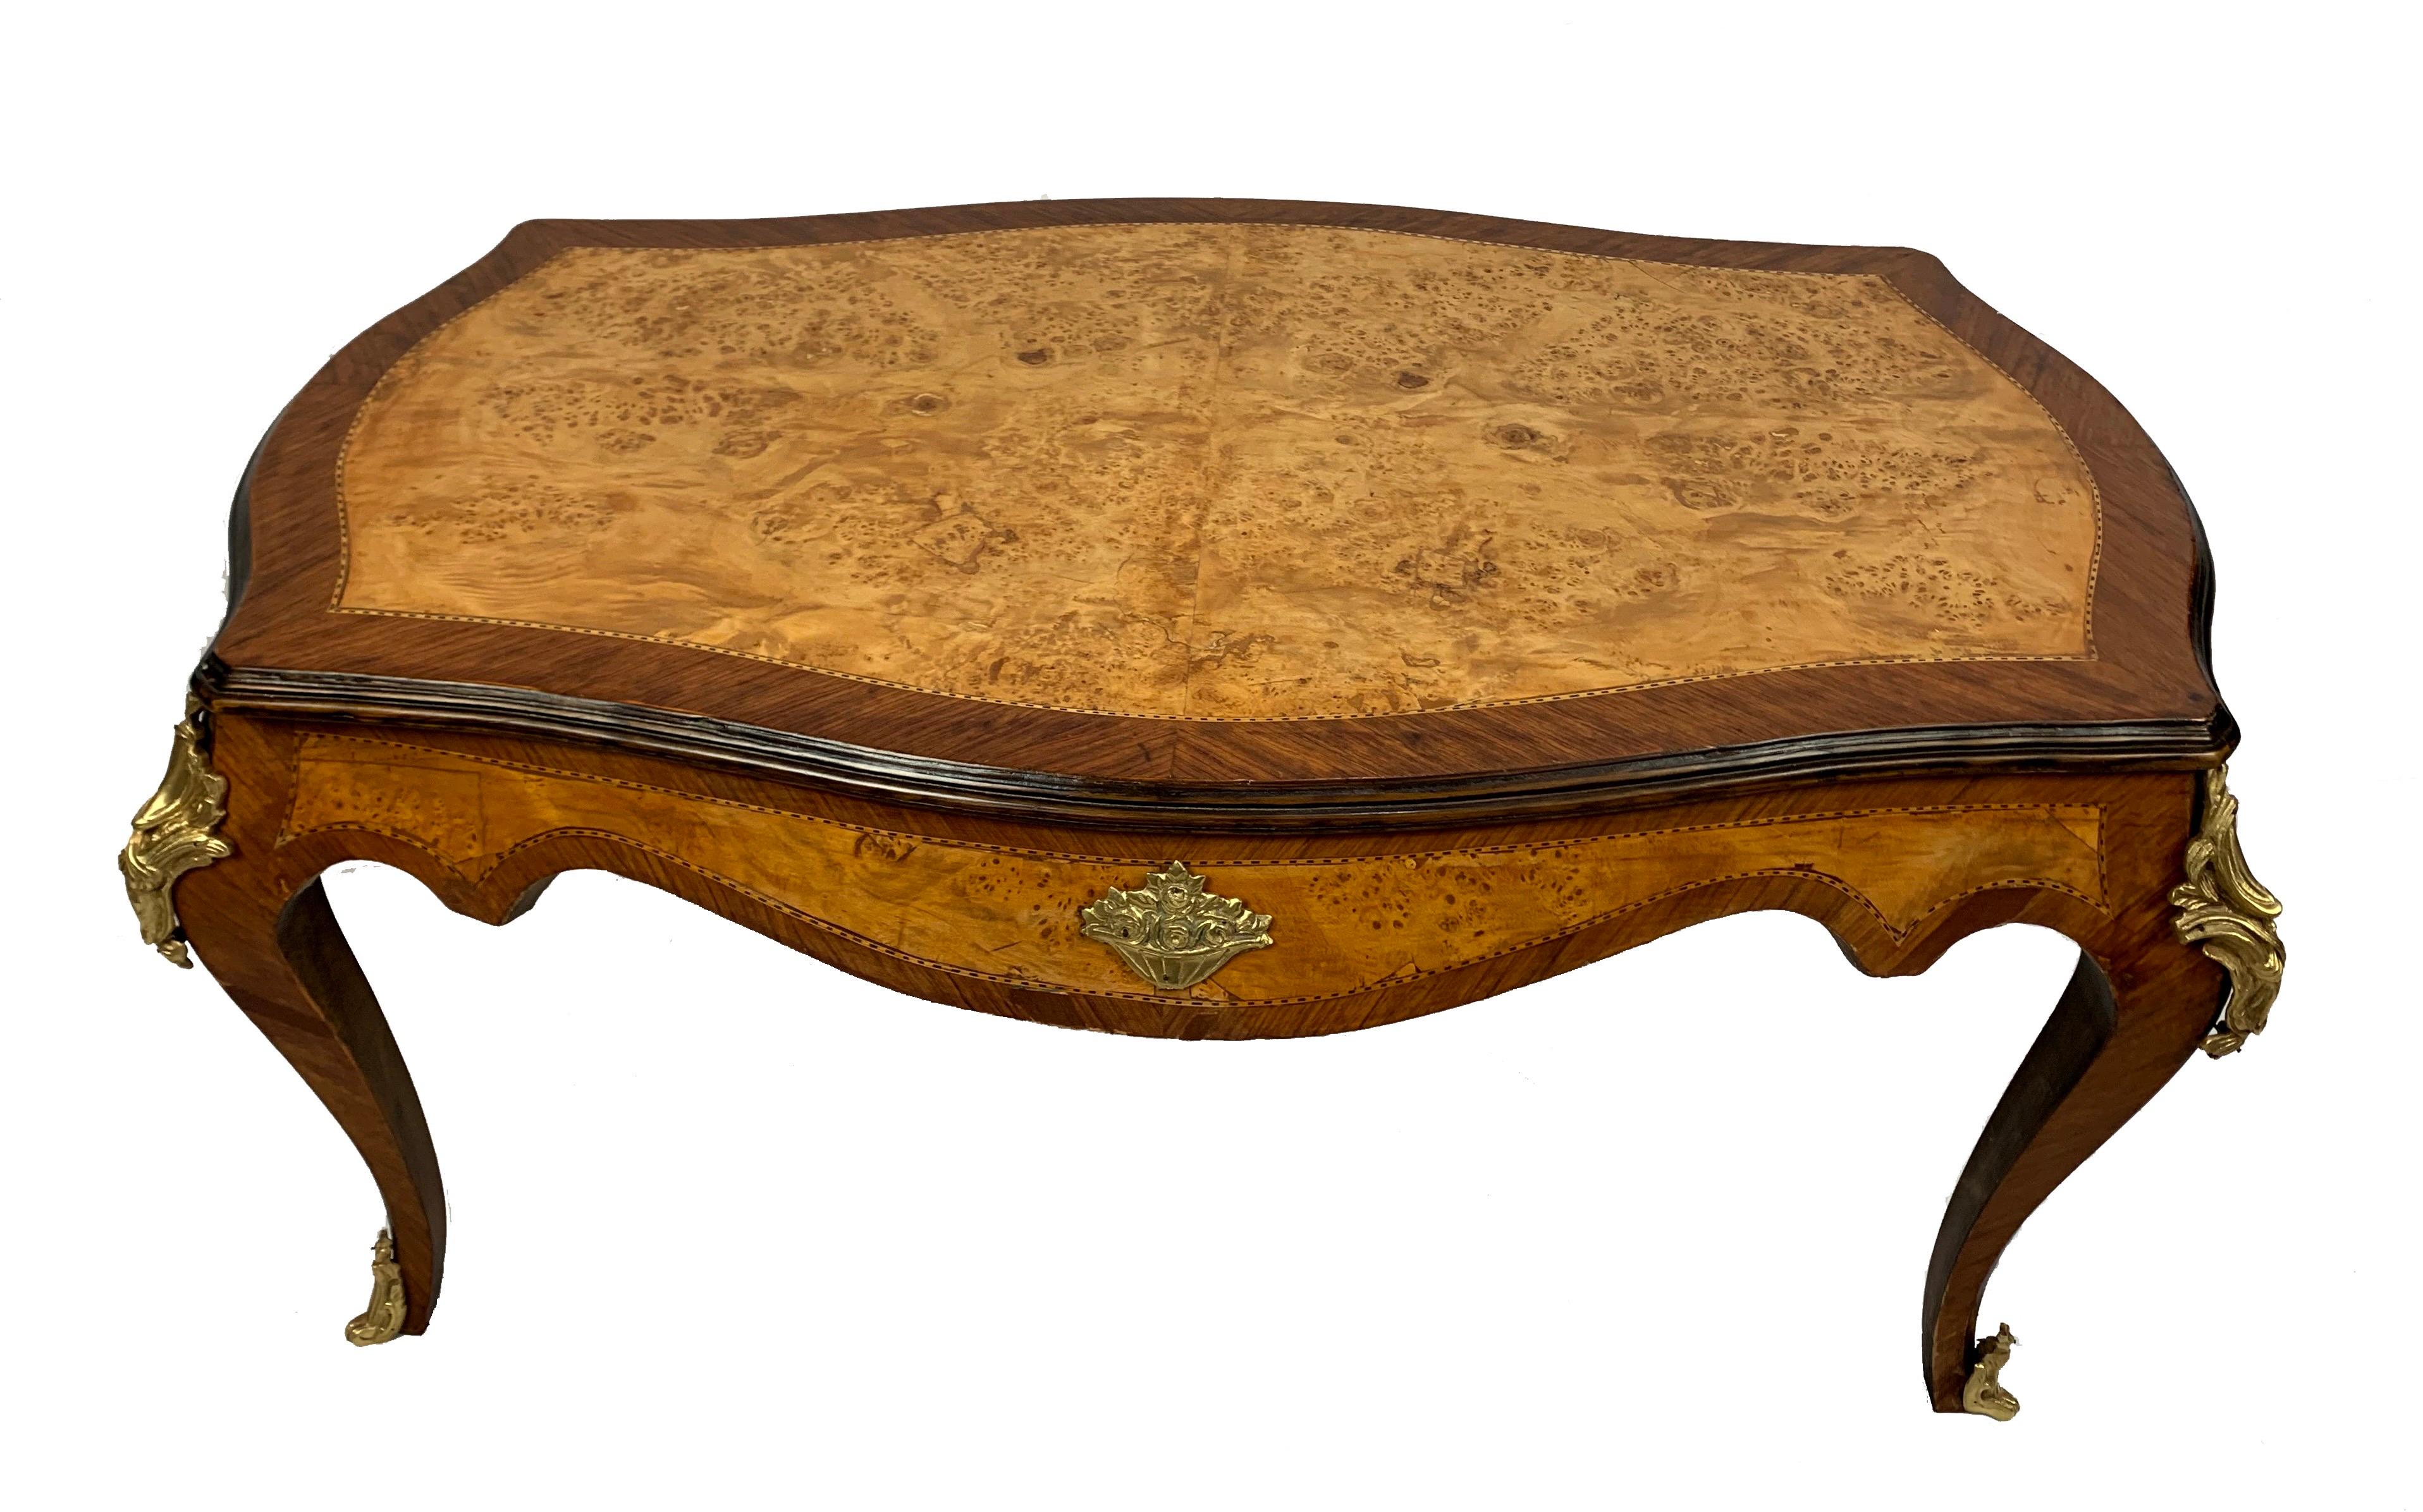 French coffee table features an exquisite rectangular burled walnut butterfly veneered top. Features gilt bronze decoration on the legs as well as on the front and back. With its exquisite burl walnut veneer top and elegant lines, this French coffee